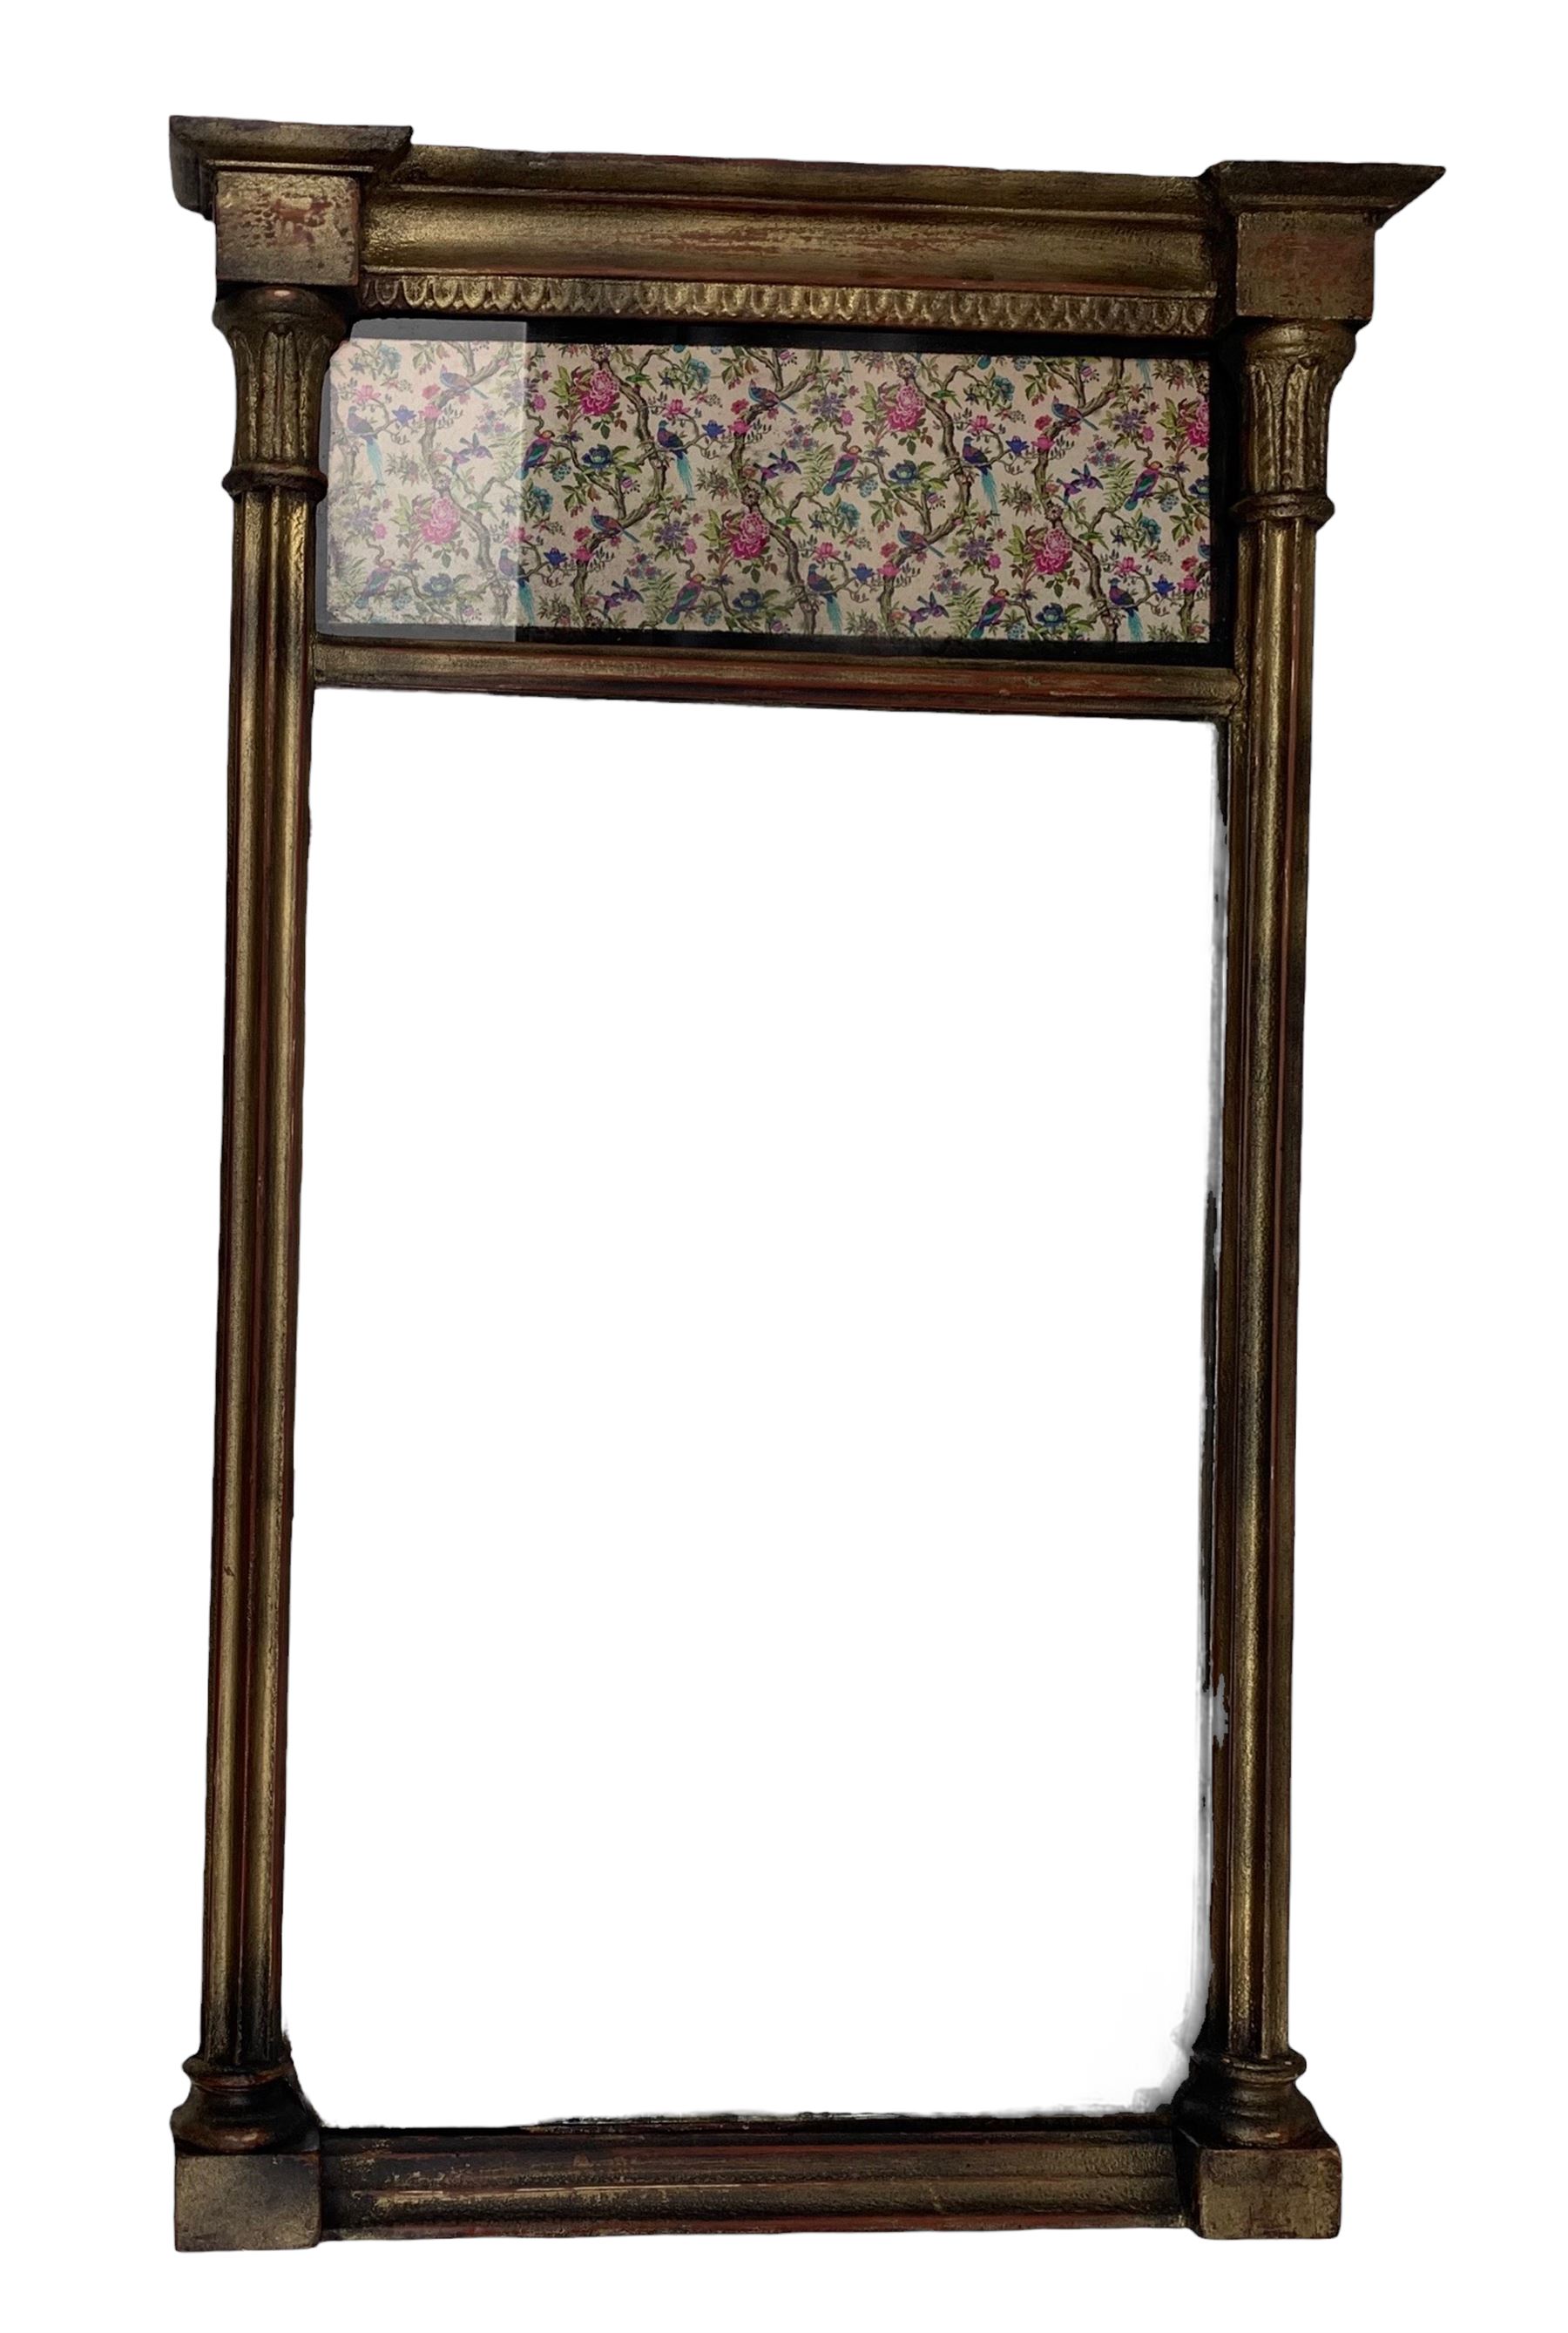 Regency style rectangular mirror with column pilasters with ornamental plate decorated with birds in